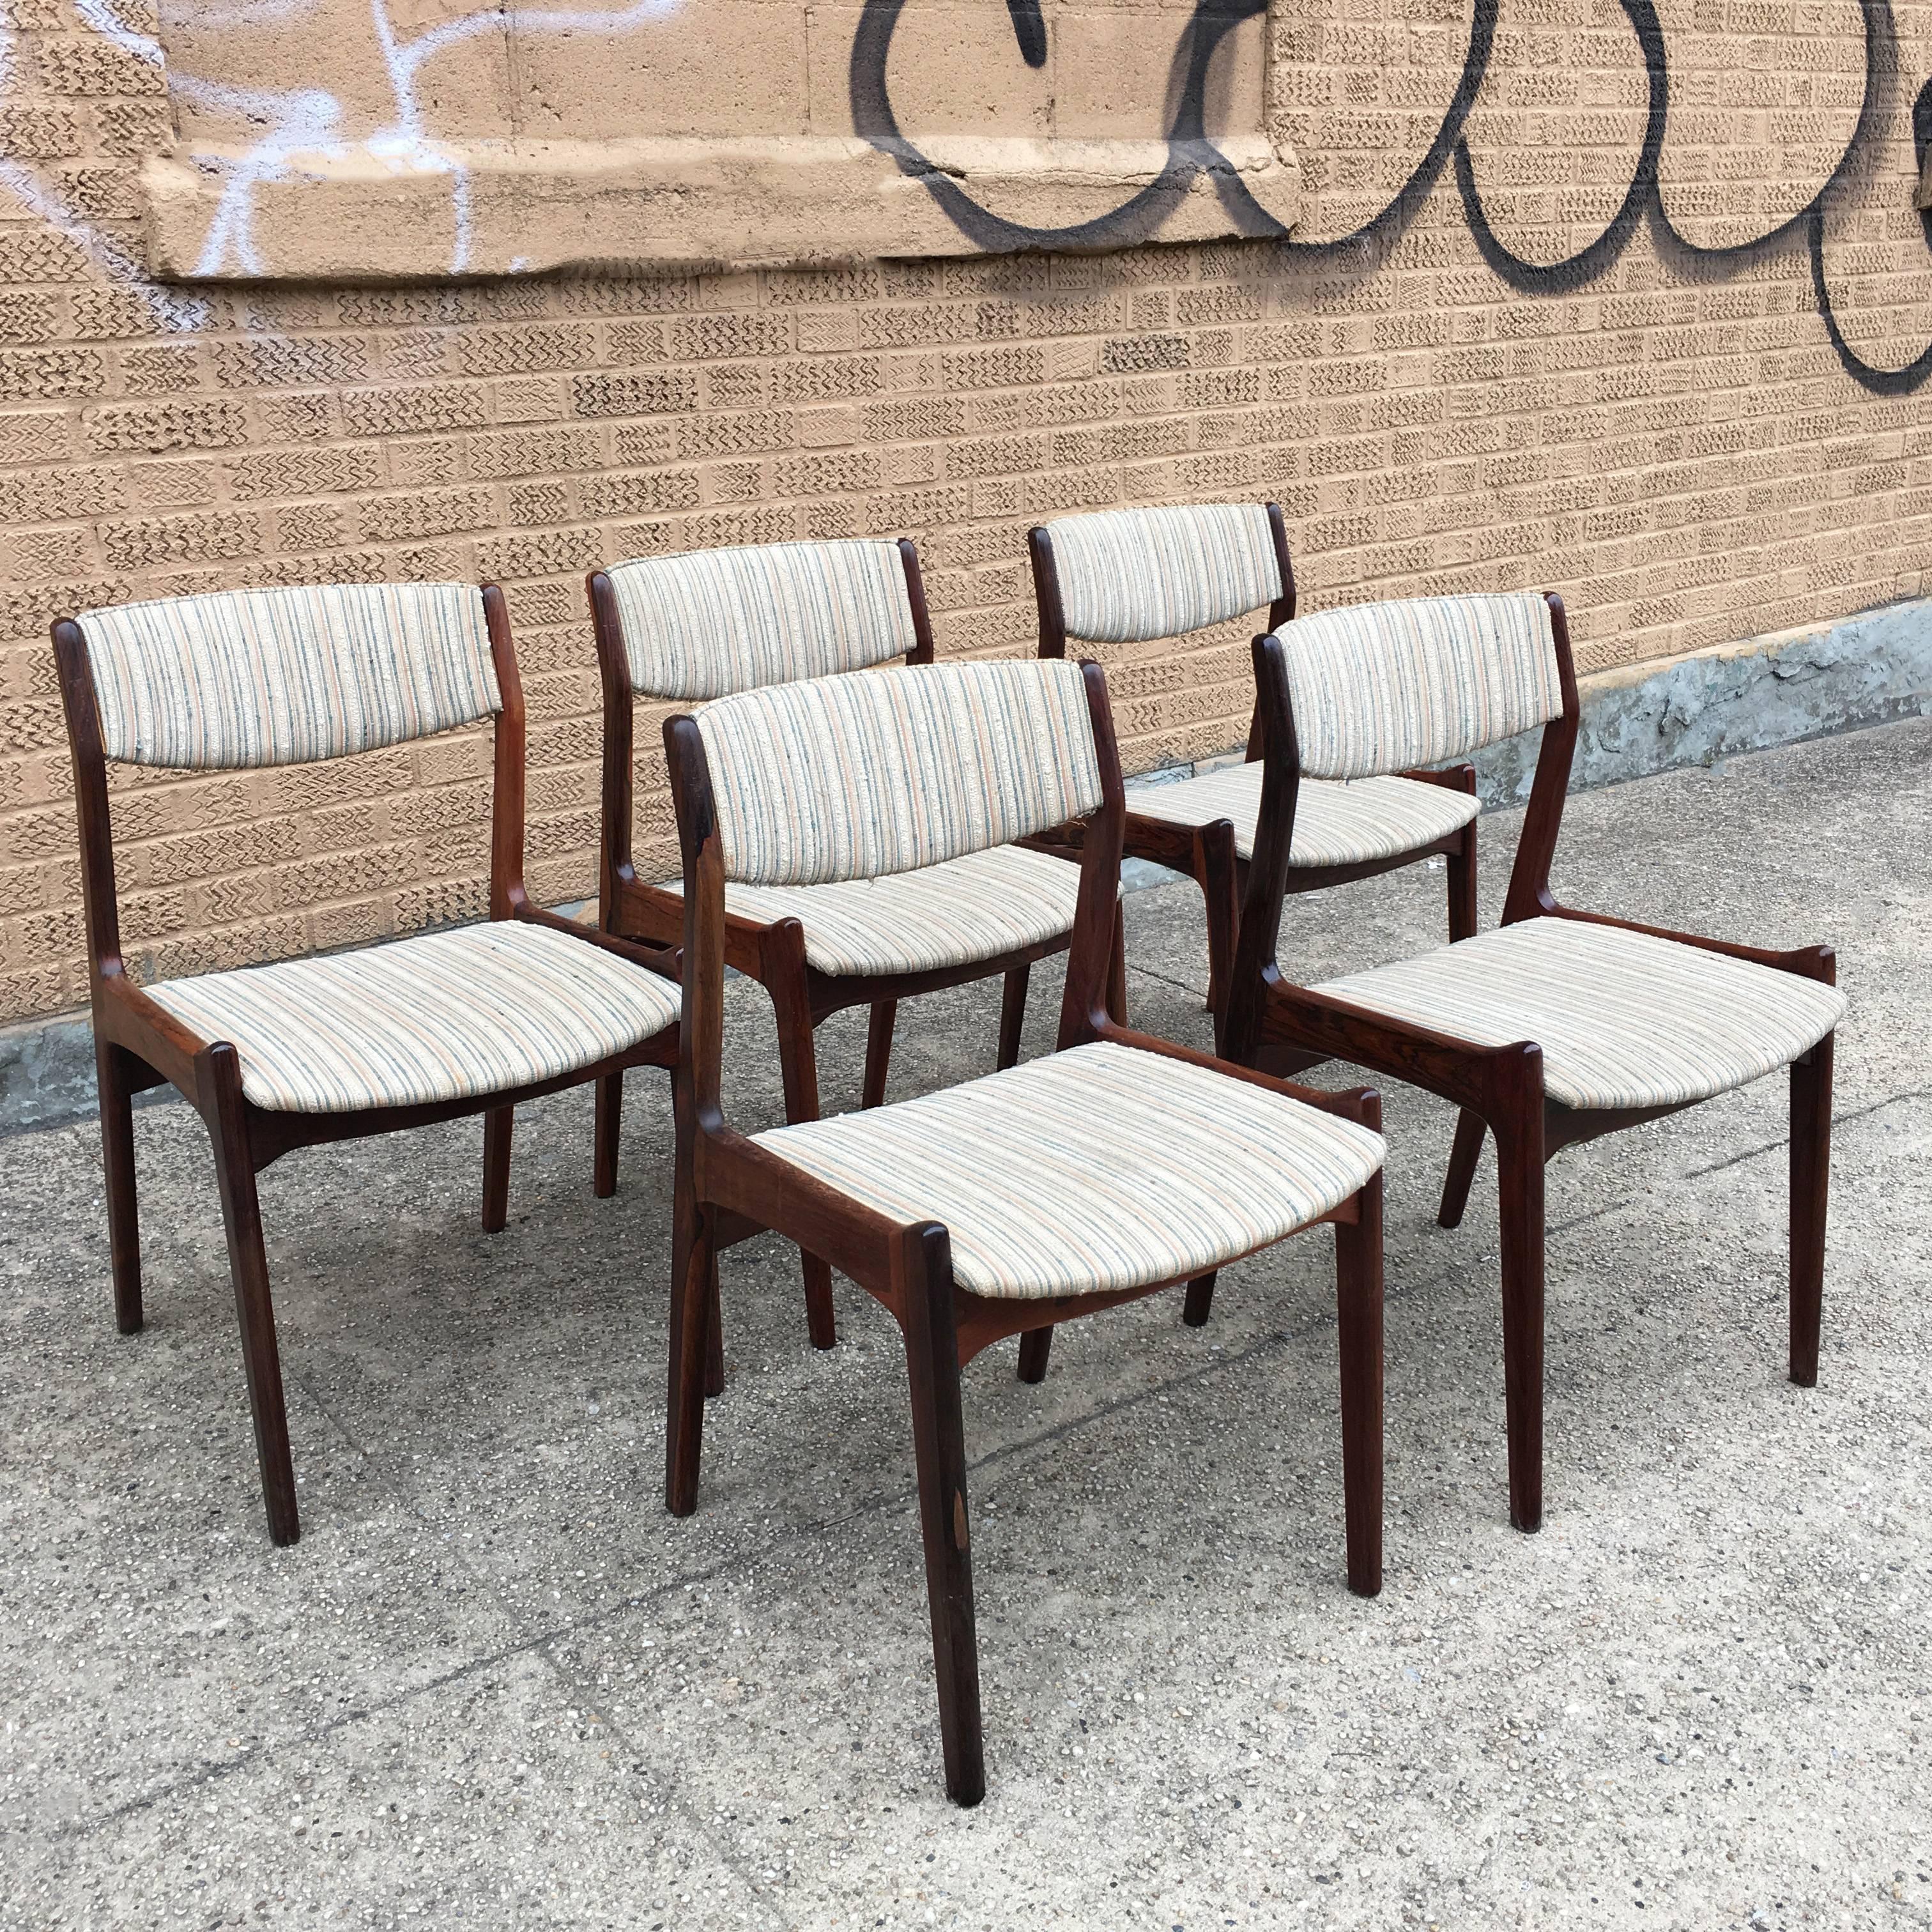 Set of five, elegant, Danish modern, rosewood dining chairs with upholstered seats and backs by Eric Buck.